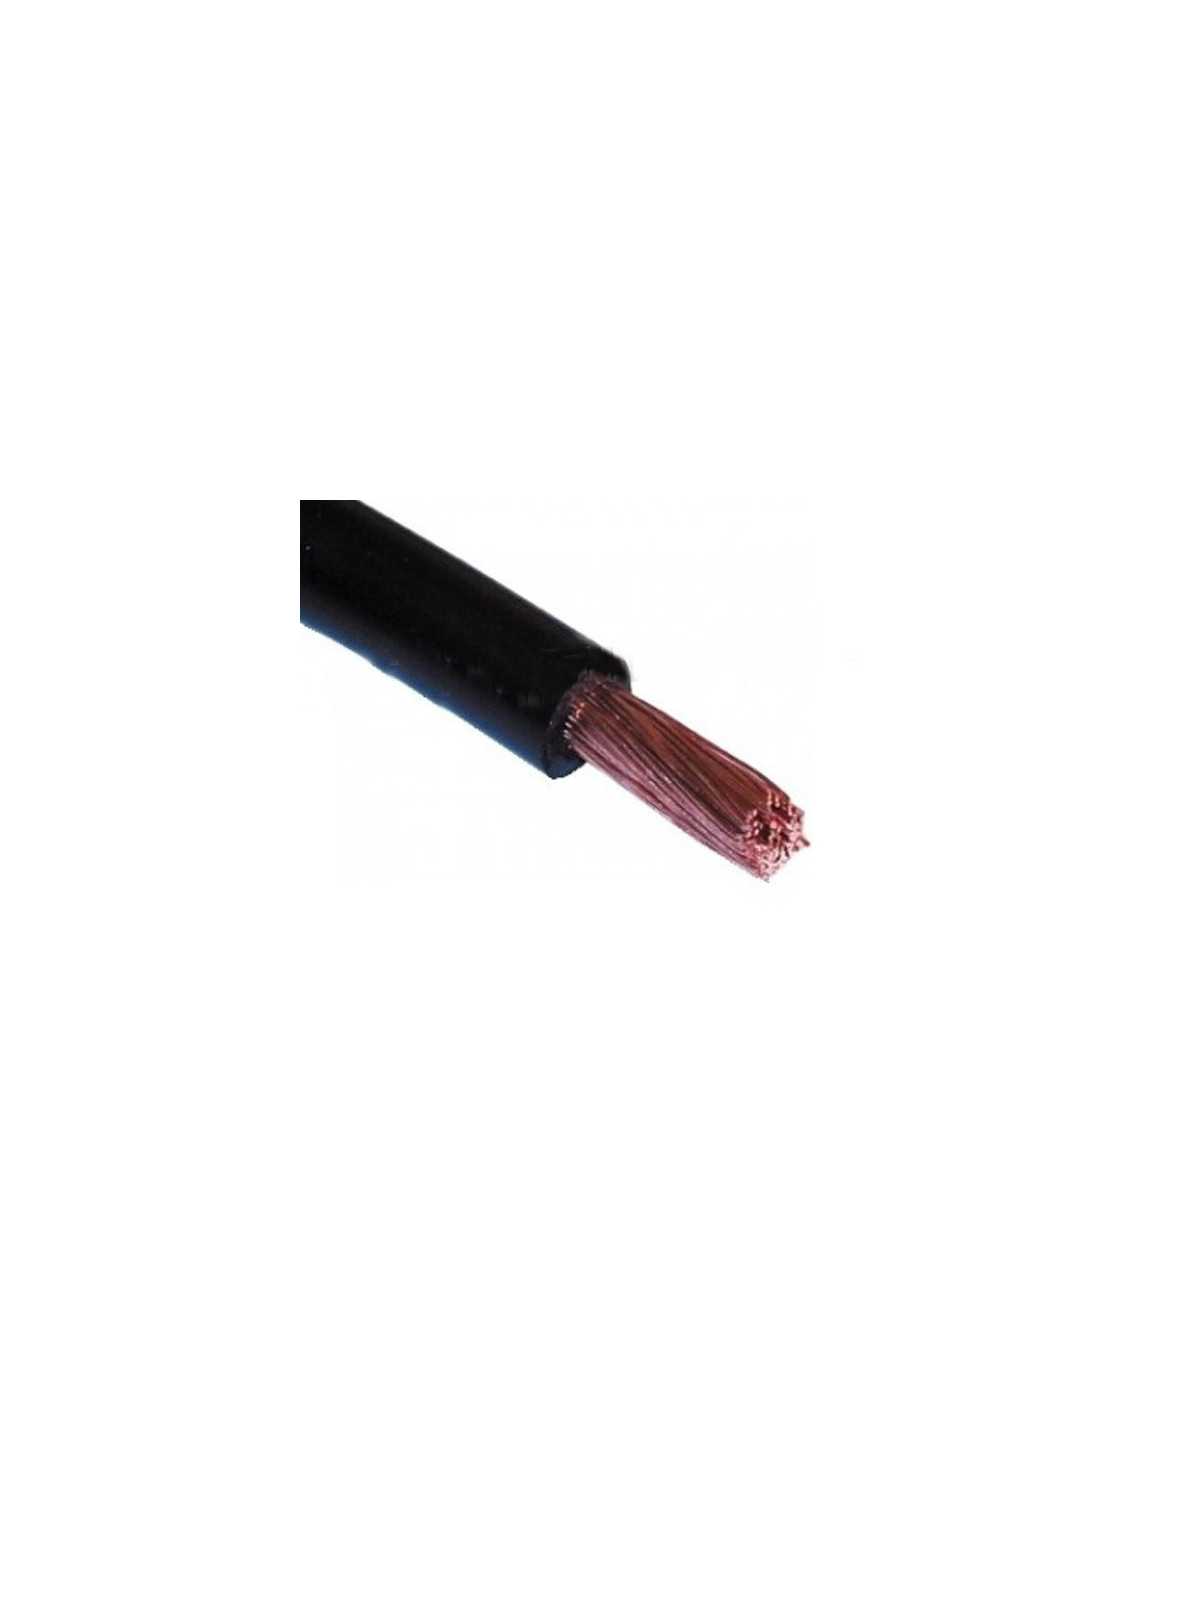  Cable 16mm²